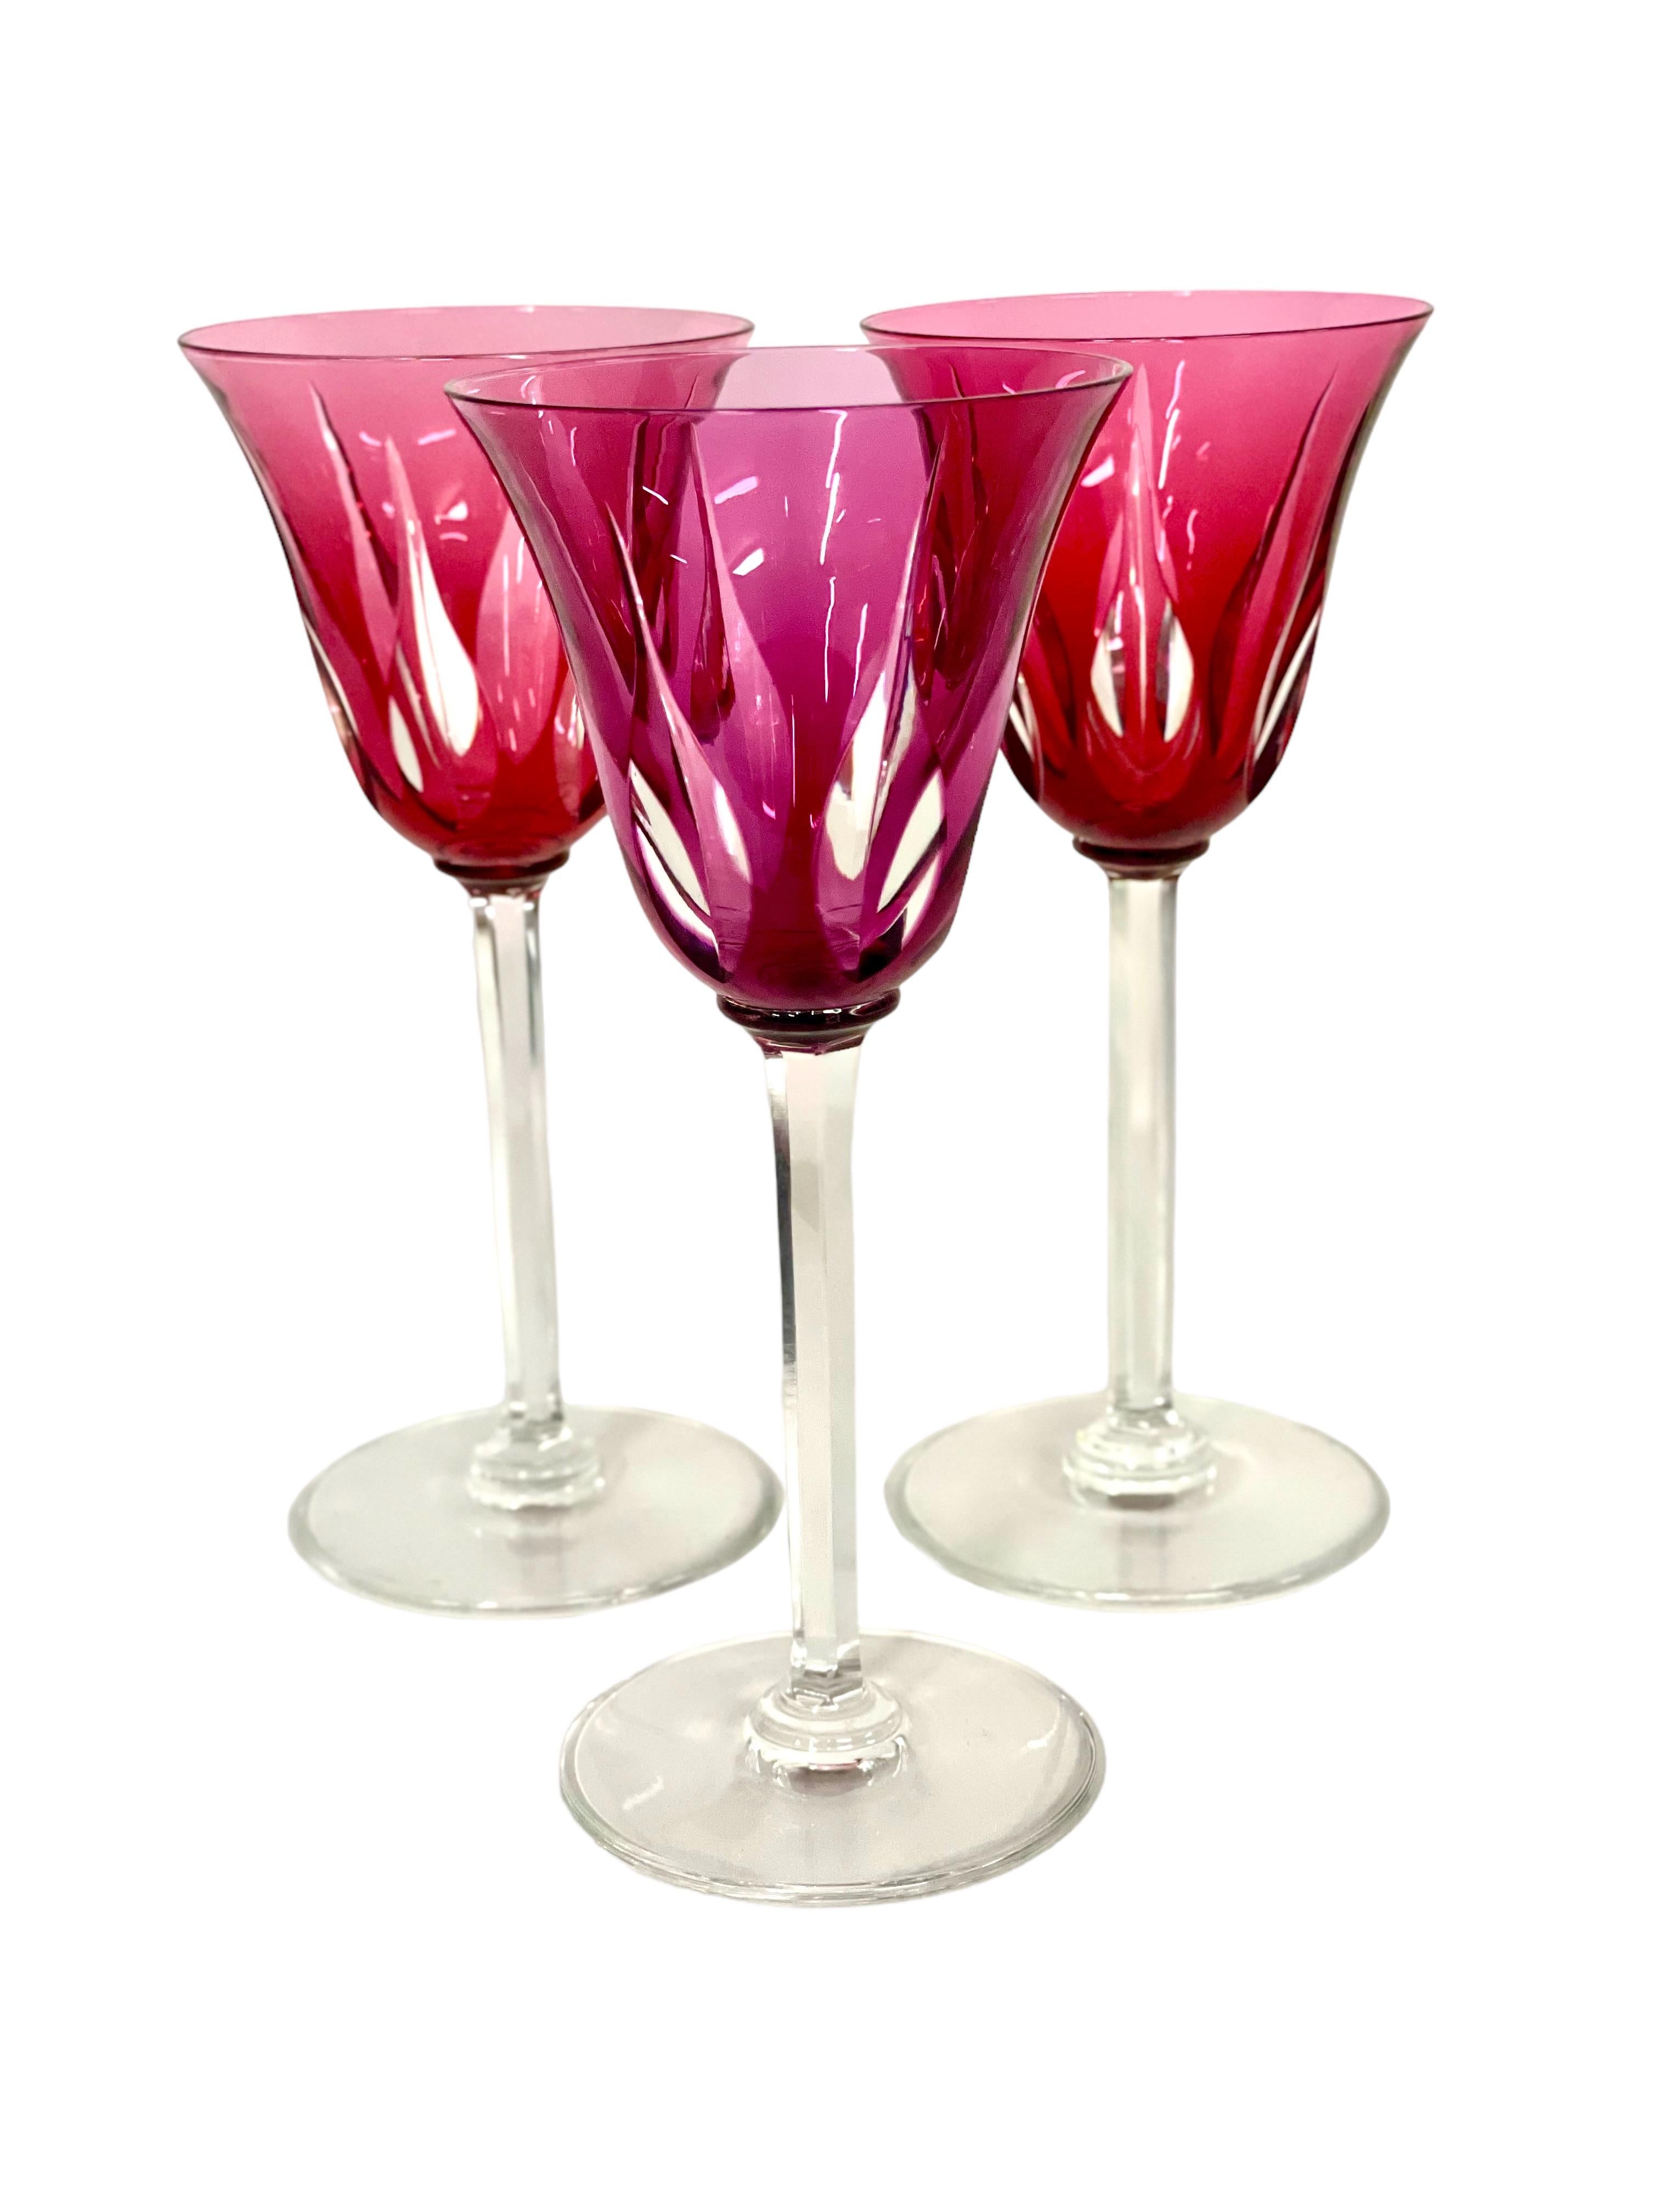 A riotously colourful set of eleven Rhine wine, or 'Roemer', glasses in sparkling Saint-Louis crystal. The tulip-shaped chalice of each is cut to clear with tall and pointed lozenges, while the stem features elegantly cut flat ribs. The glasses are